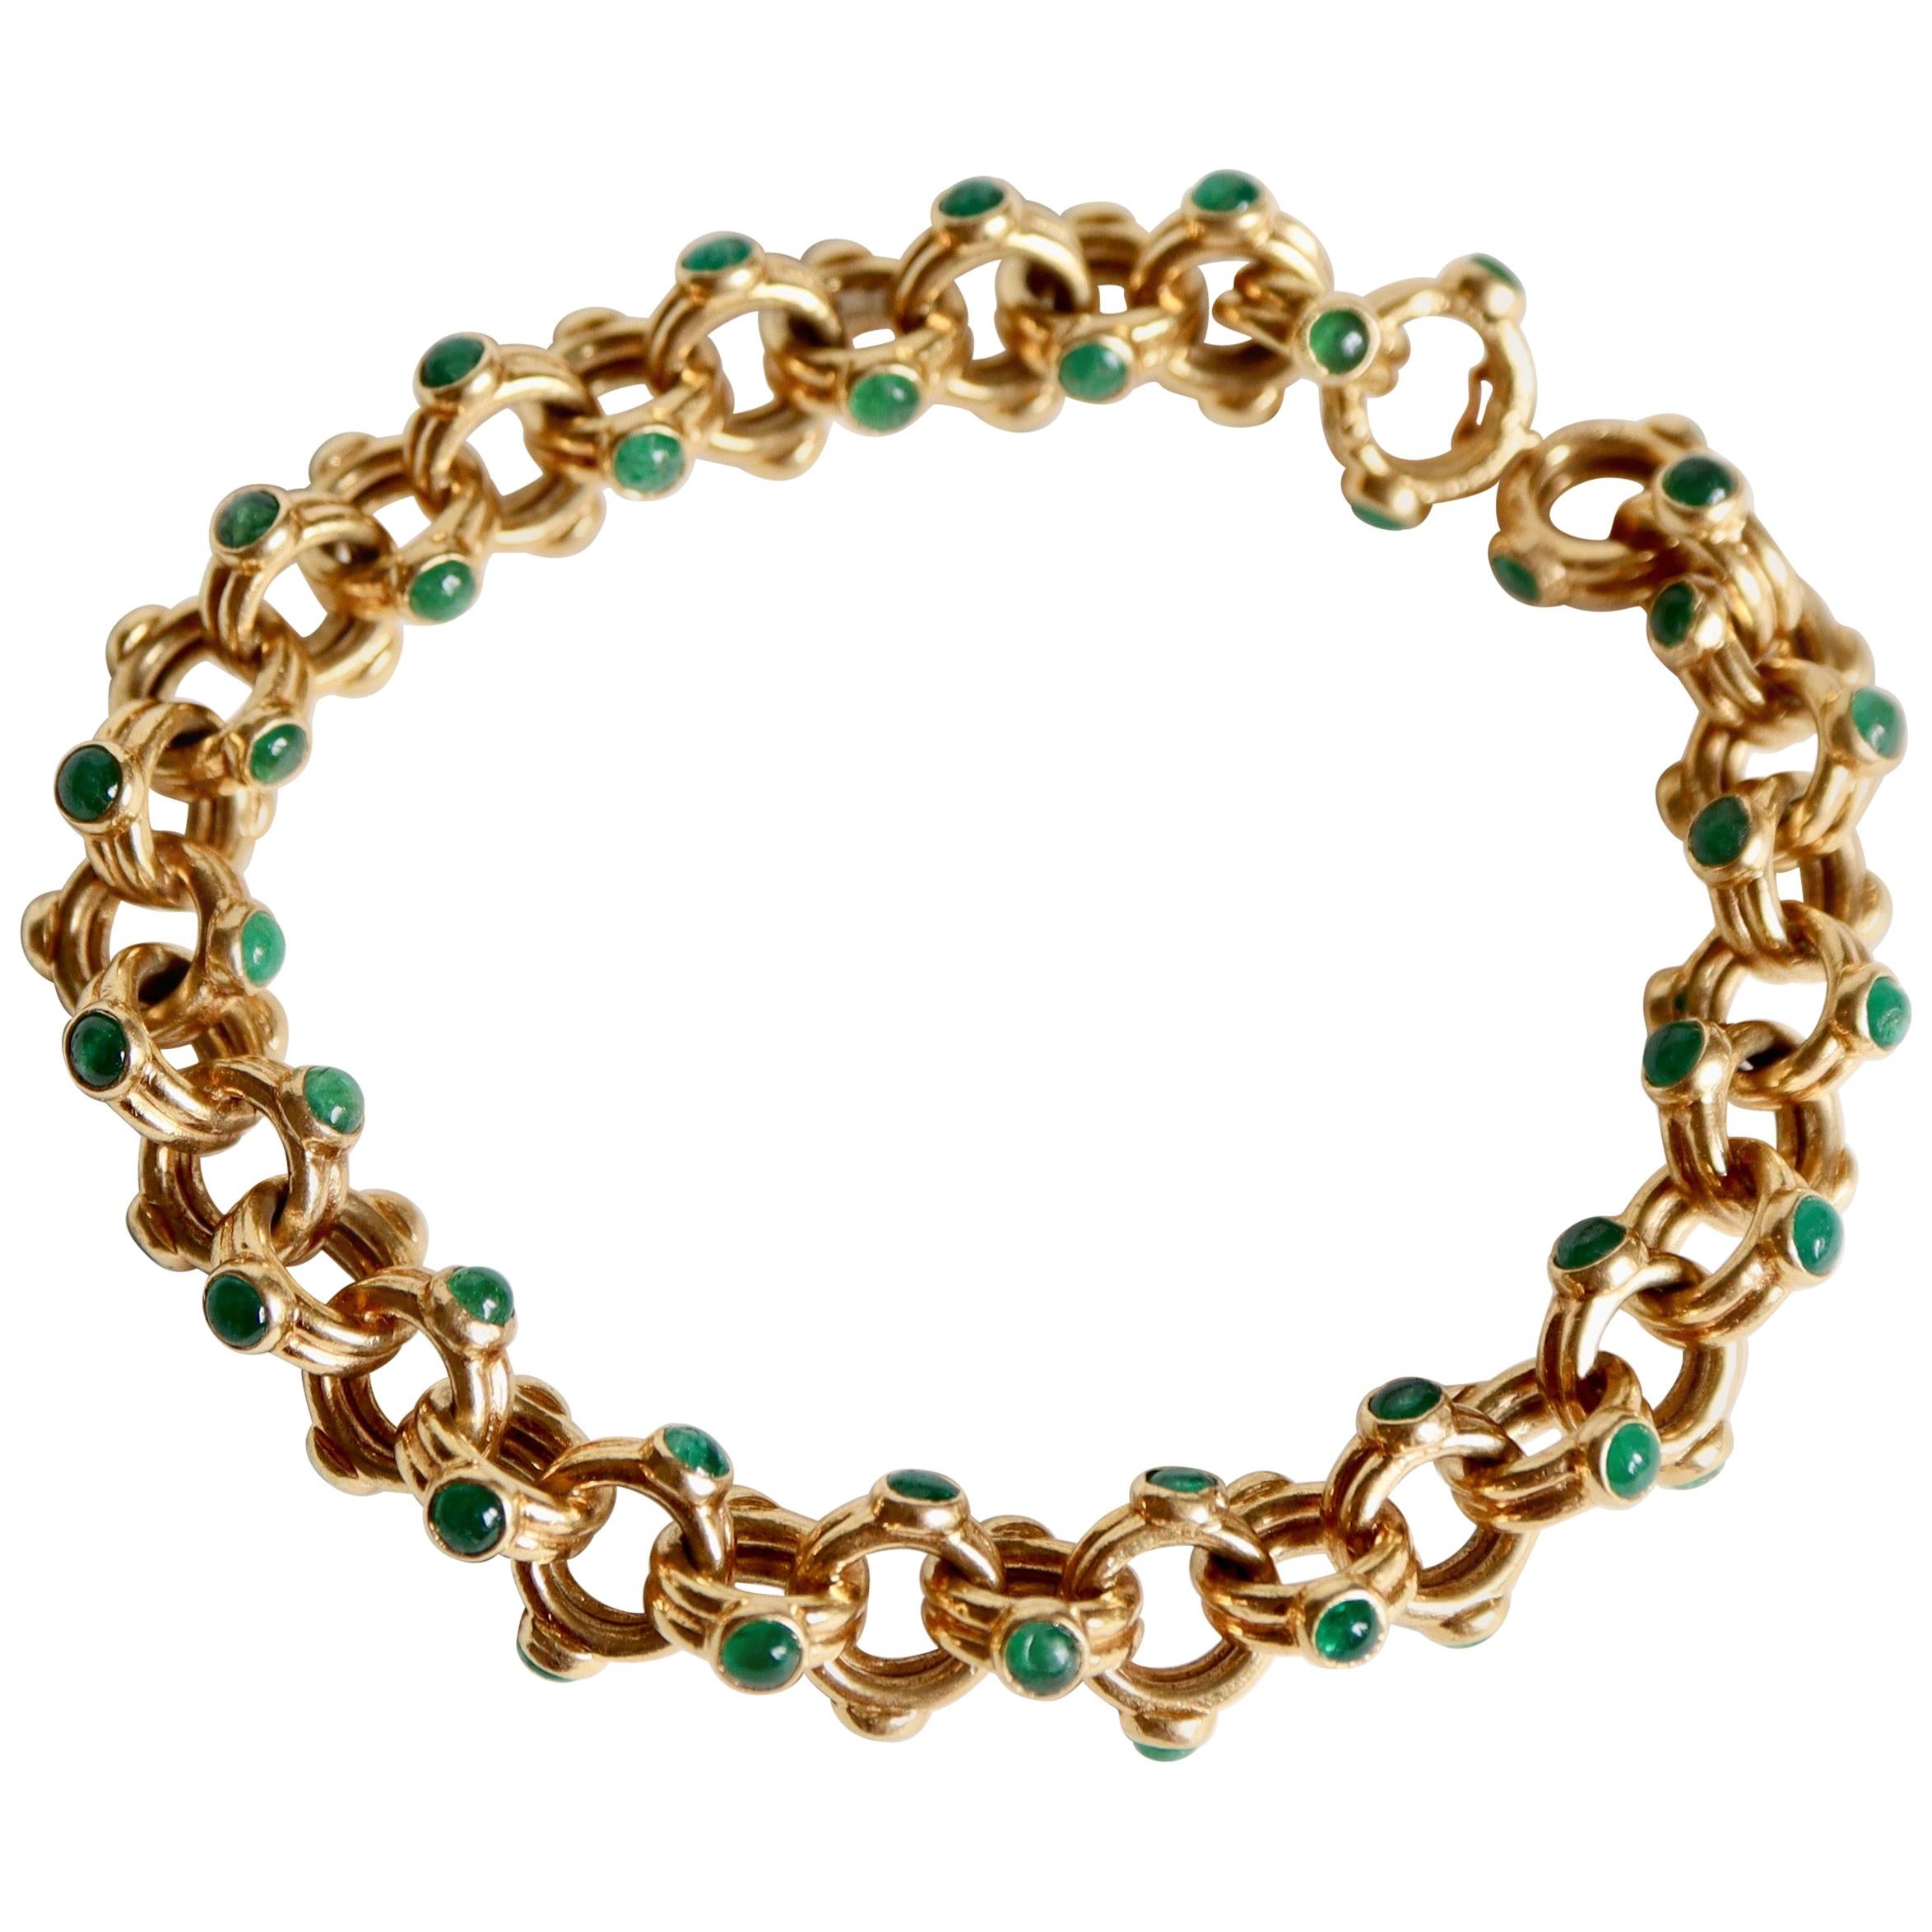 Verney Poiray Bracelet in 18 Carat Yellow Gold and Emeralds, 1970